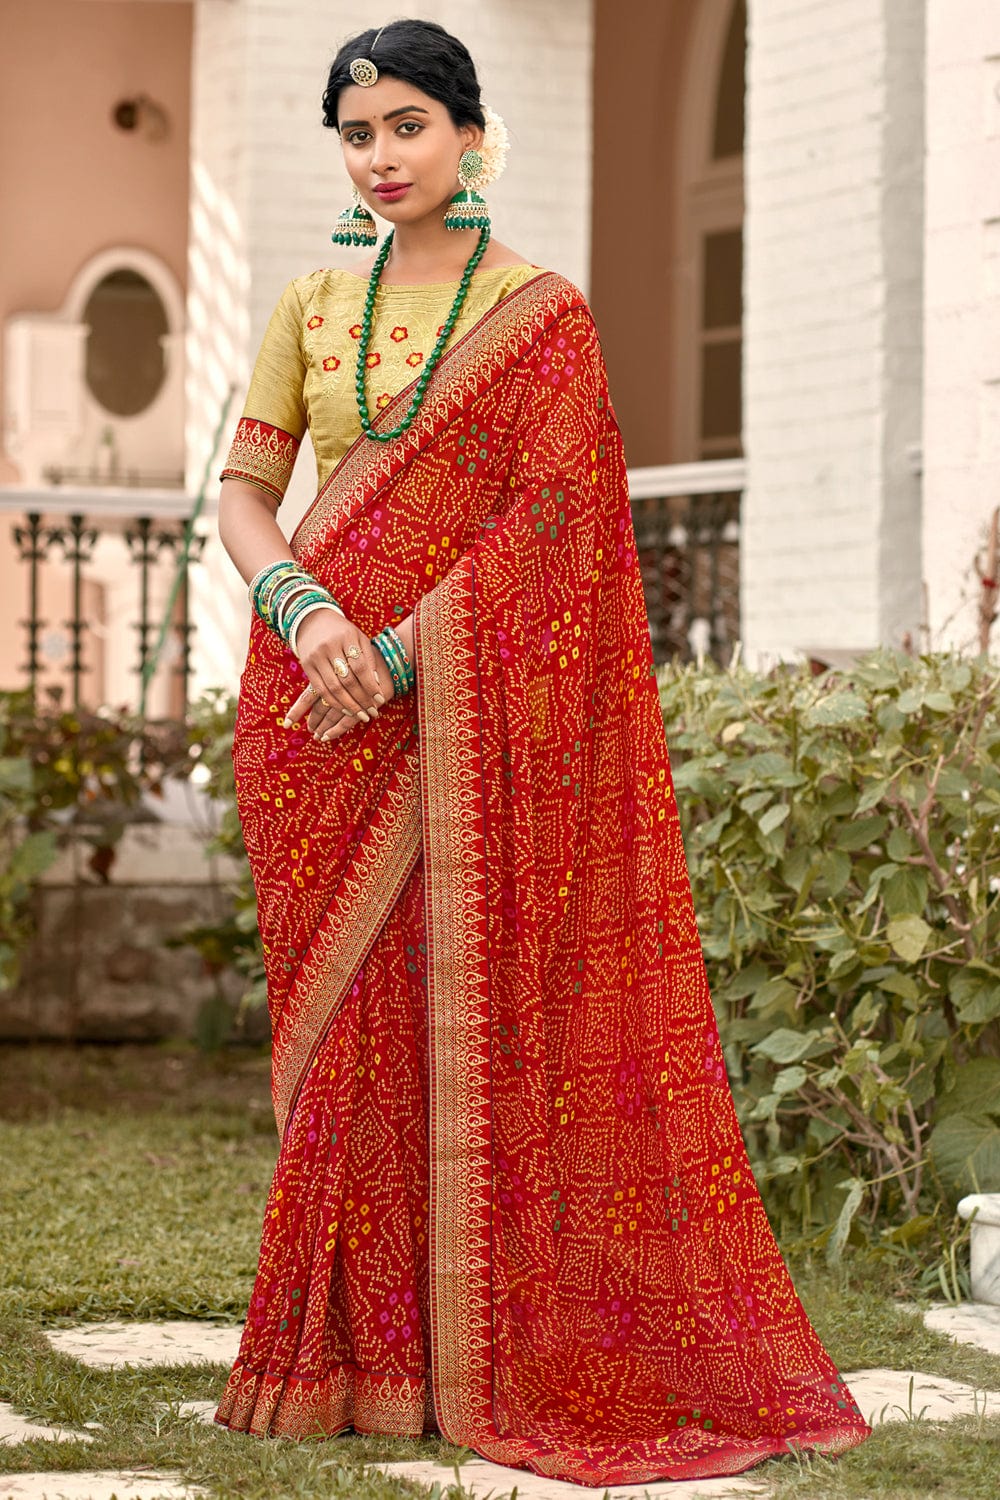 Buy Free Shipping Offers,worldwide Free Shipping ,buy Bandhani Saree Usa  Online in India,indian Designer Bandhani Sarees Online,original Bandhej  Online in India - Etsy